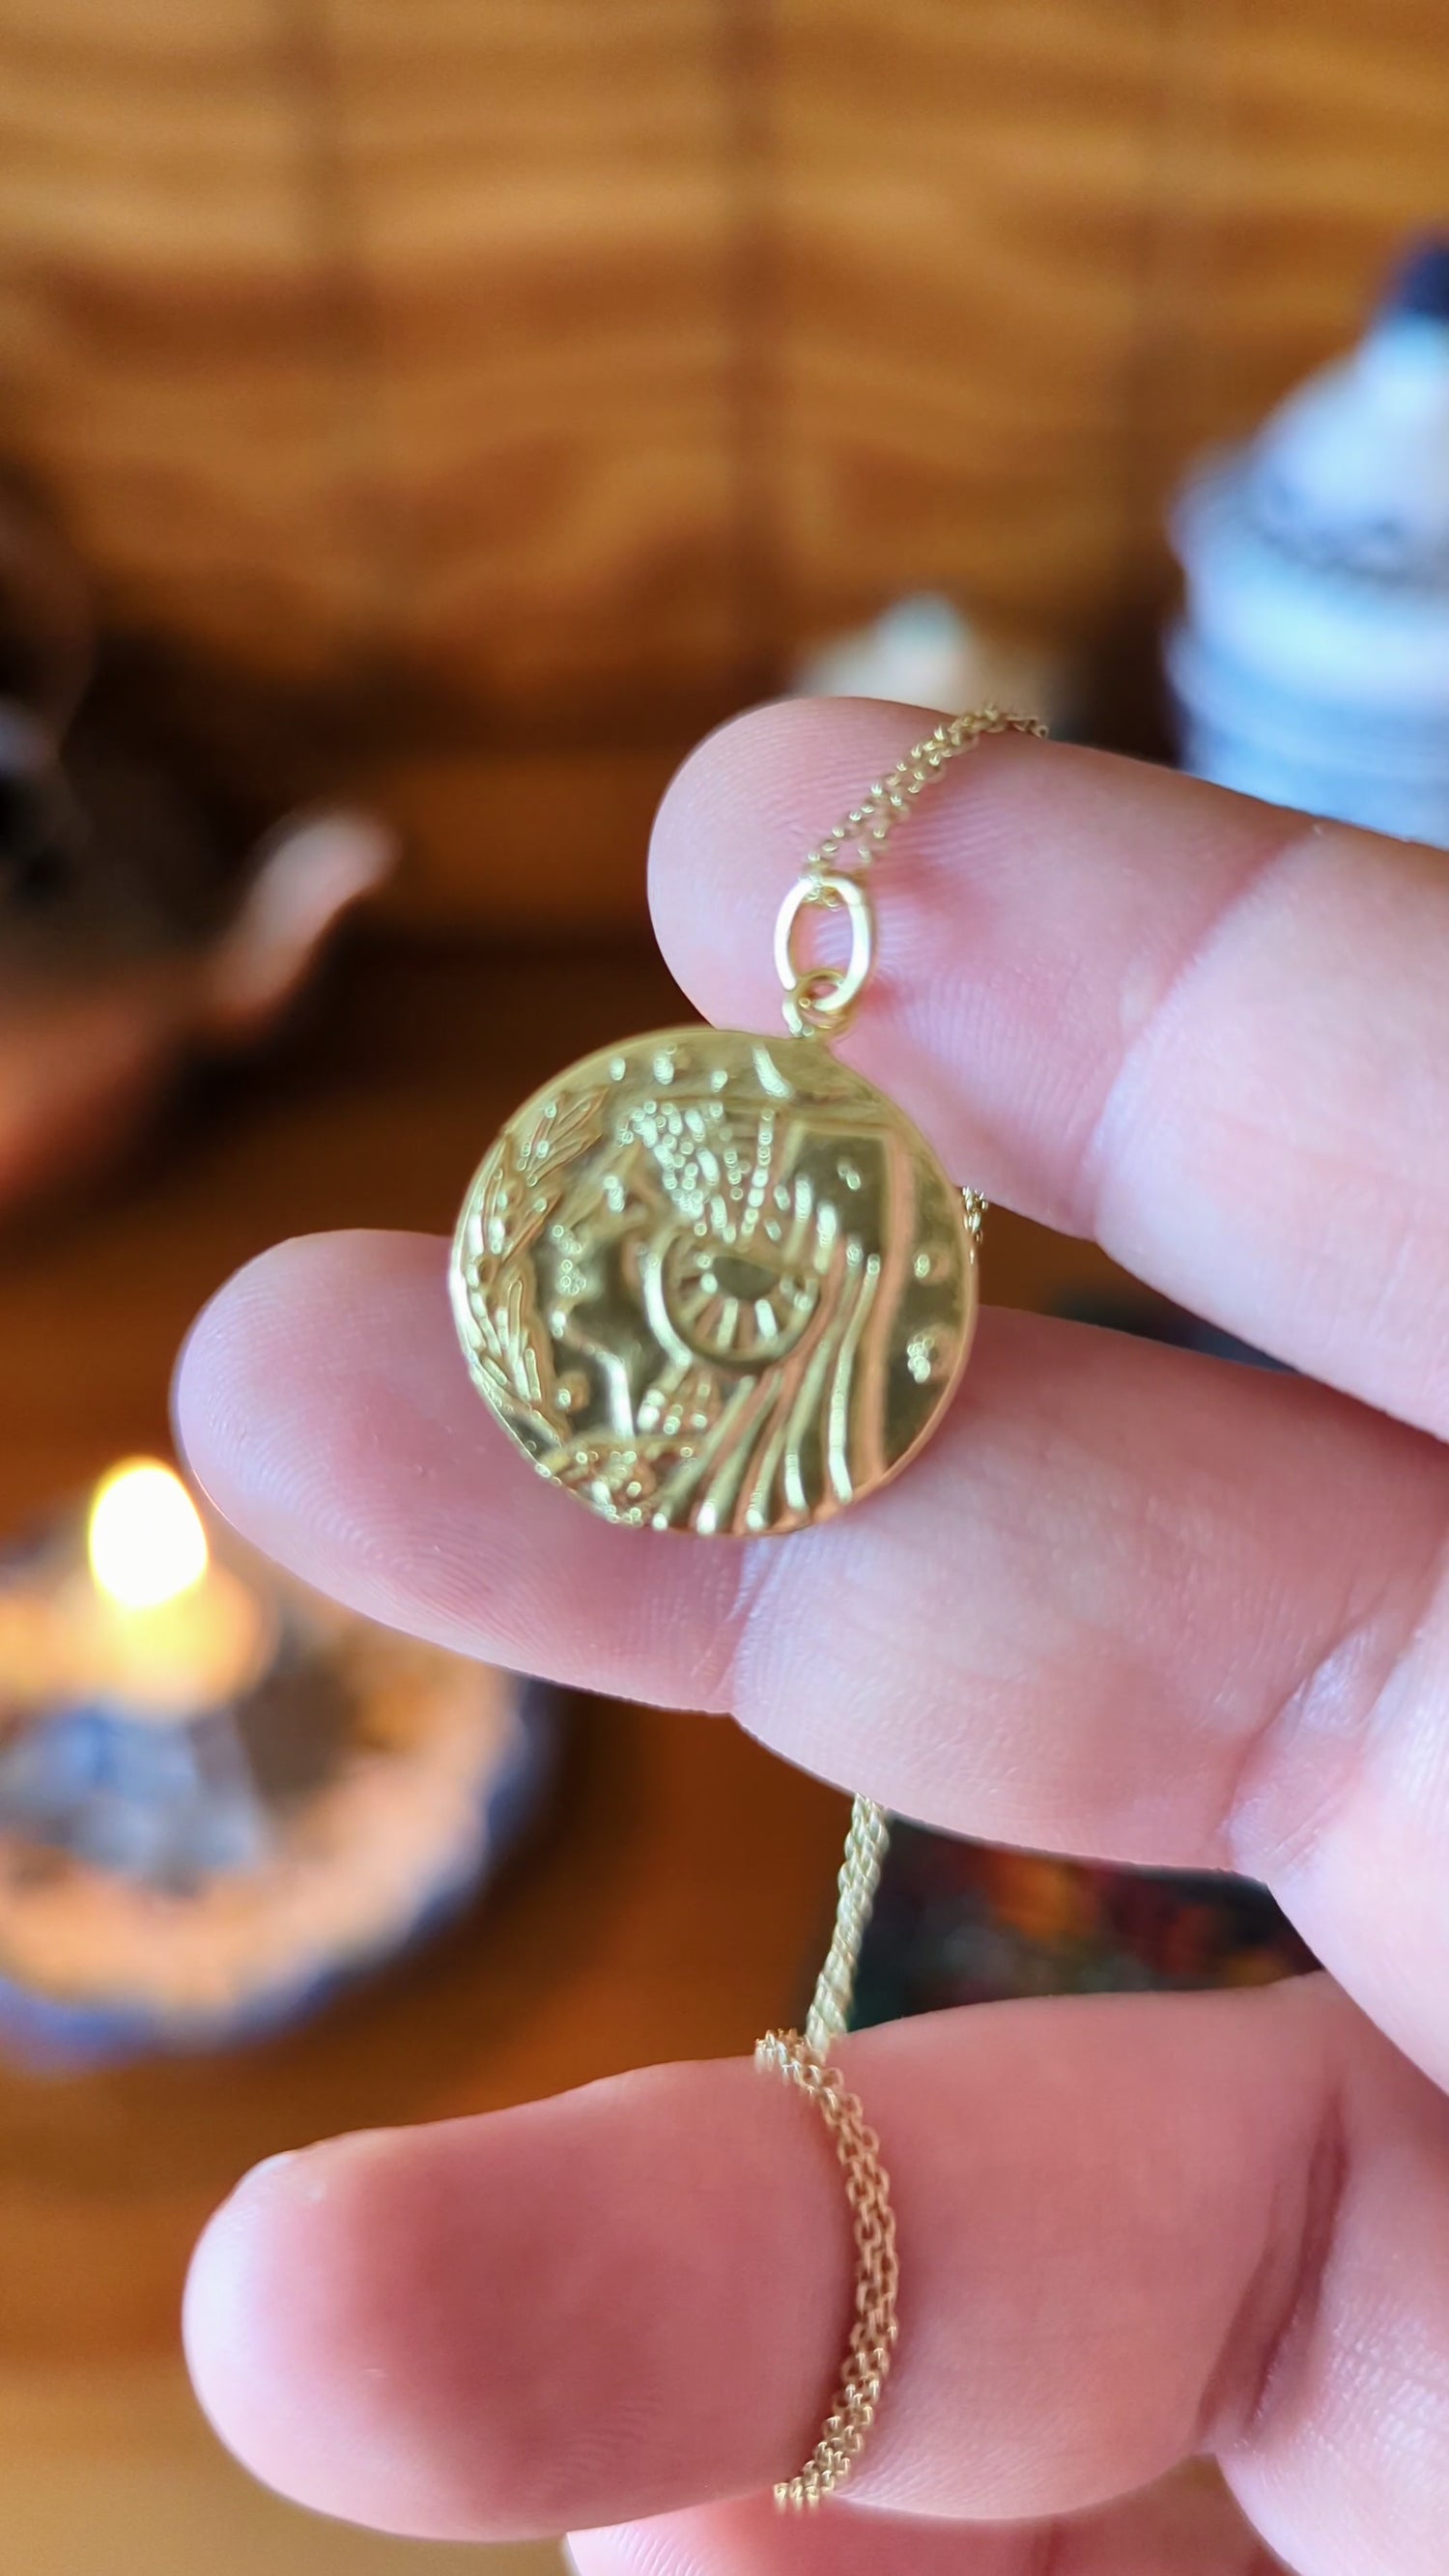 GOLDEN HECATE IBERIAN PENDANT AMULET TALISMAN WITCHERY WITCH THINGS